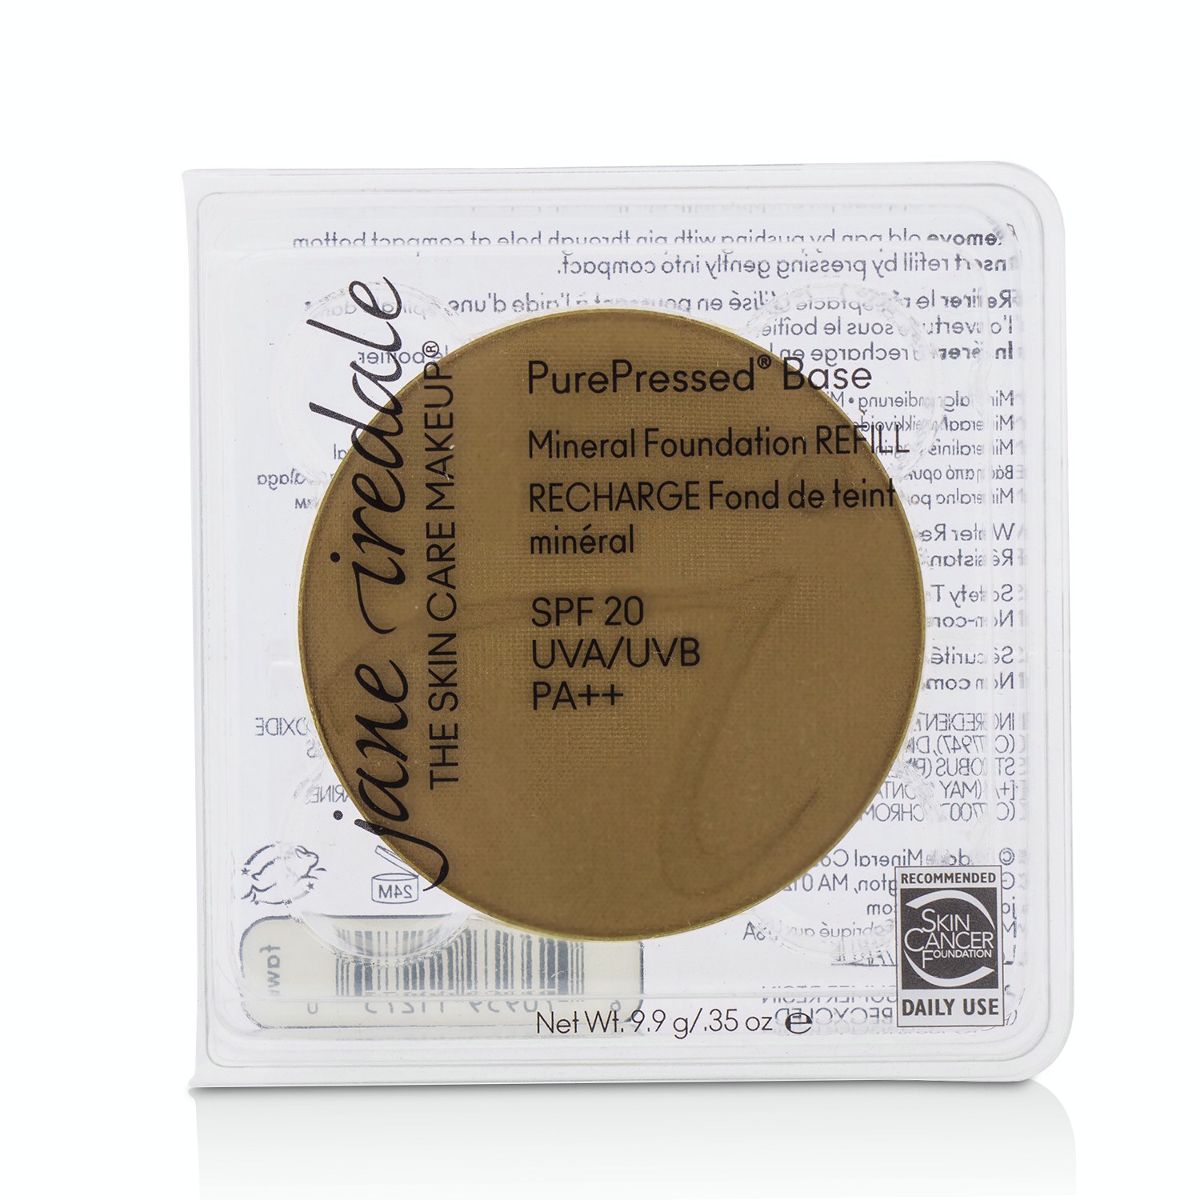 PurePressed Base Mineral Foundation Refill SPF 20 - Fawn Jane Iredale Image